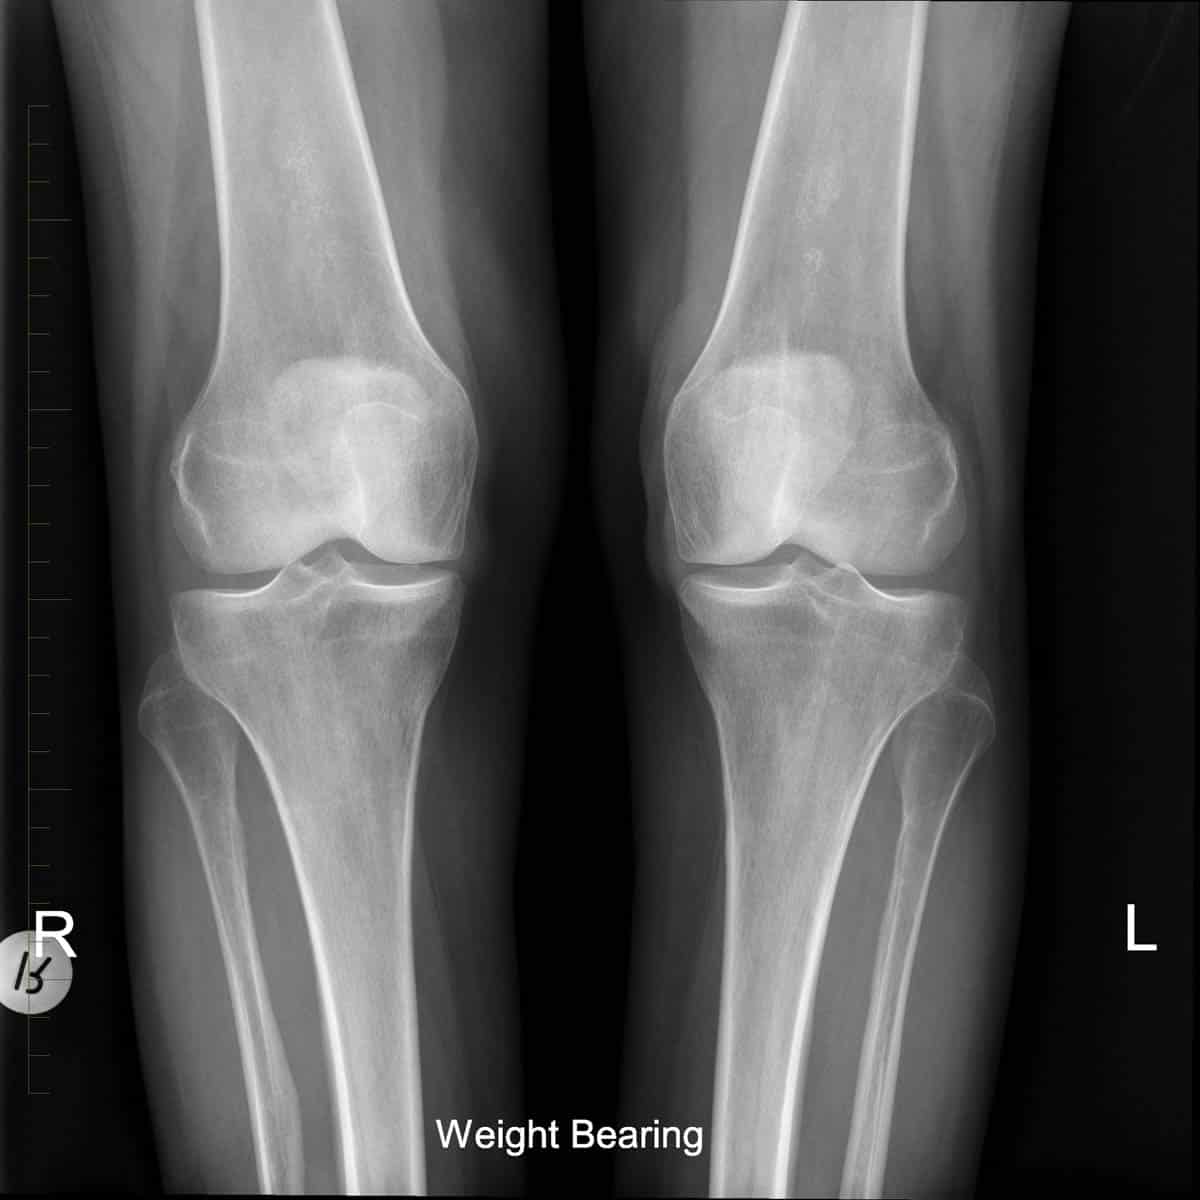 Digital X-Ray of 2 Knees - Melbourne Radiology Clinic